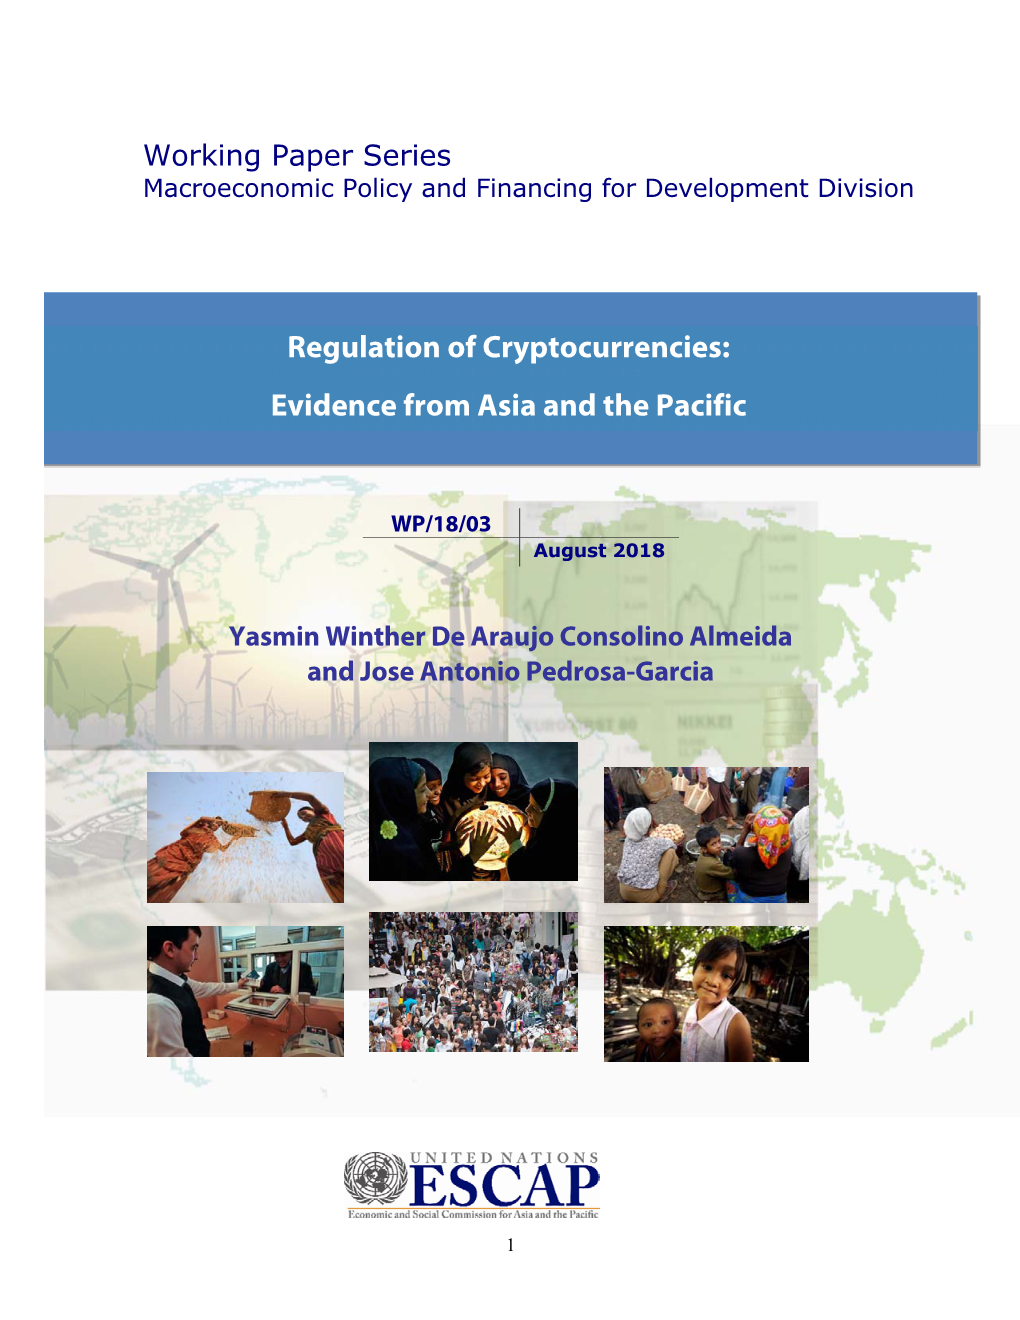 Regulation of Cryptocurrencies: Evidence from Asia and the Pacific